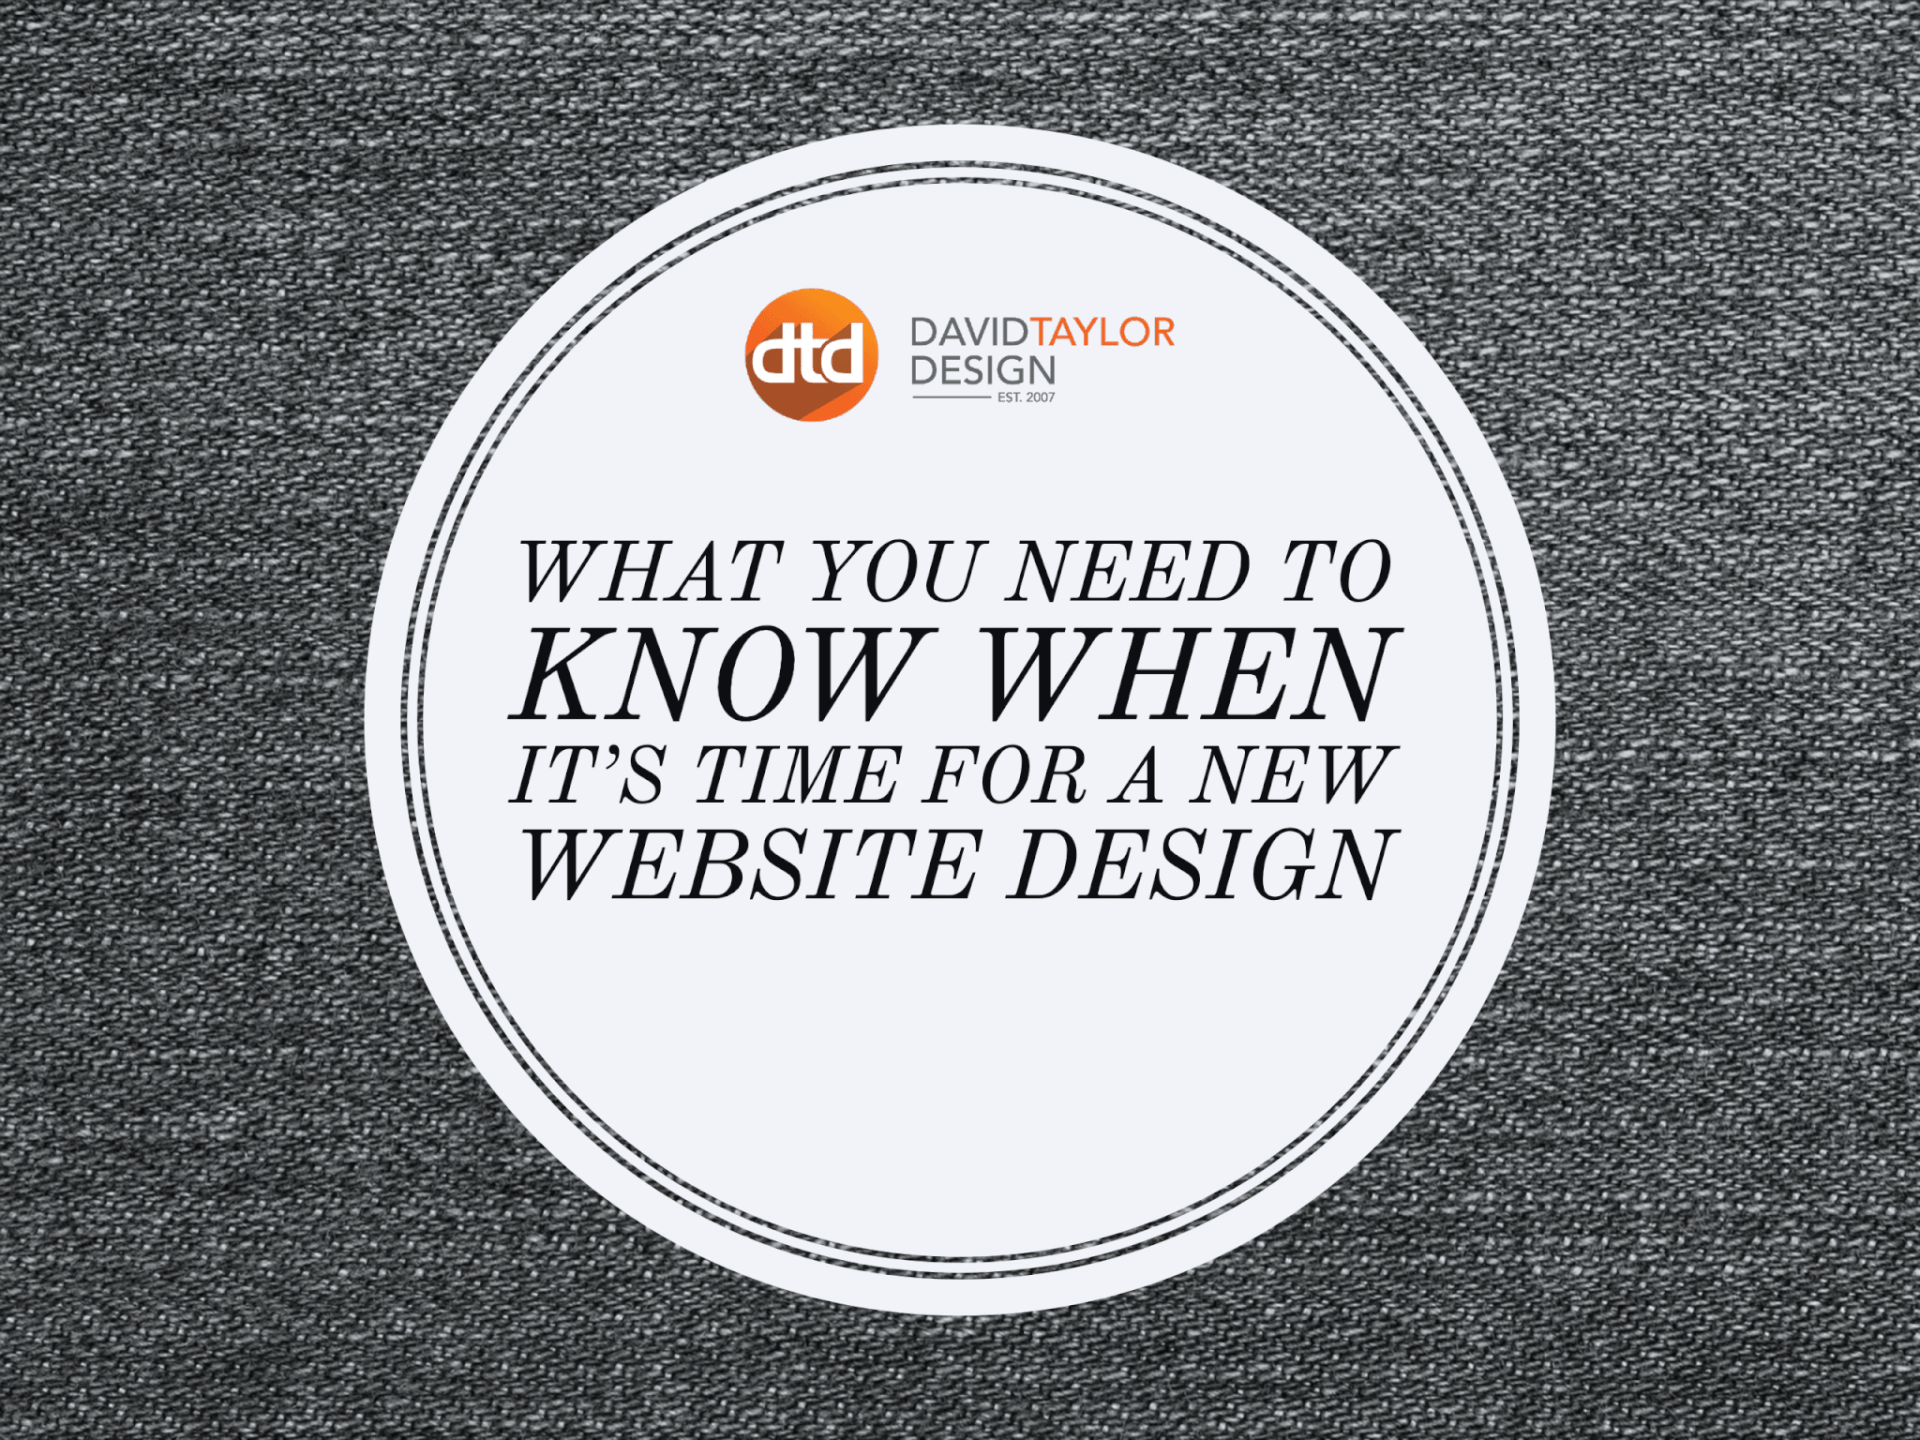 What You Need to Know When it’s Time for a New Website Design